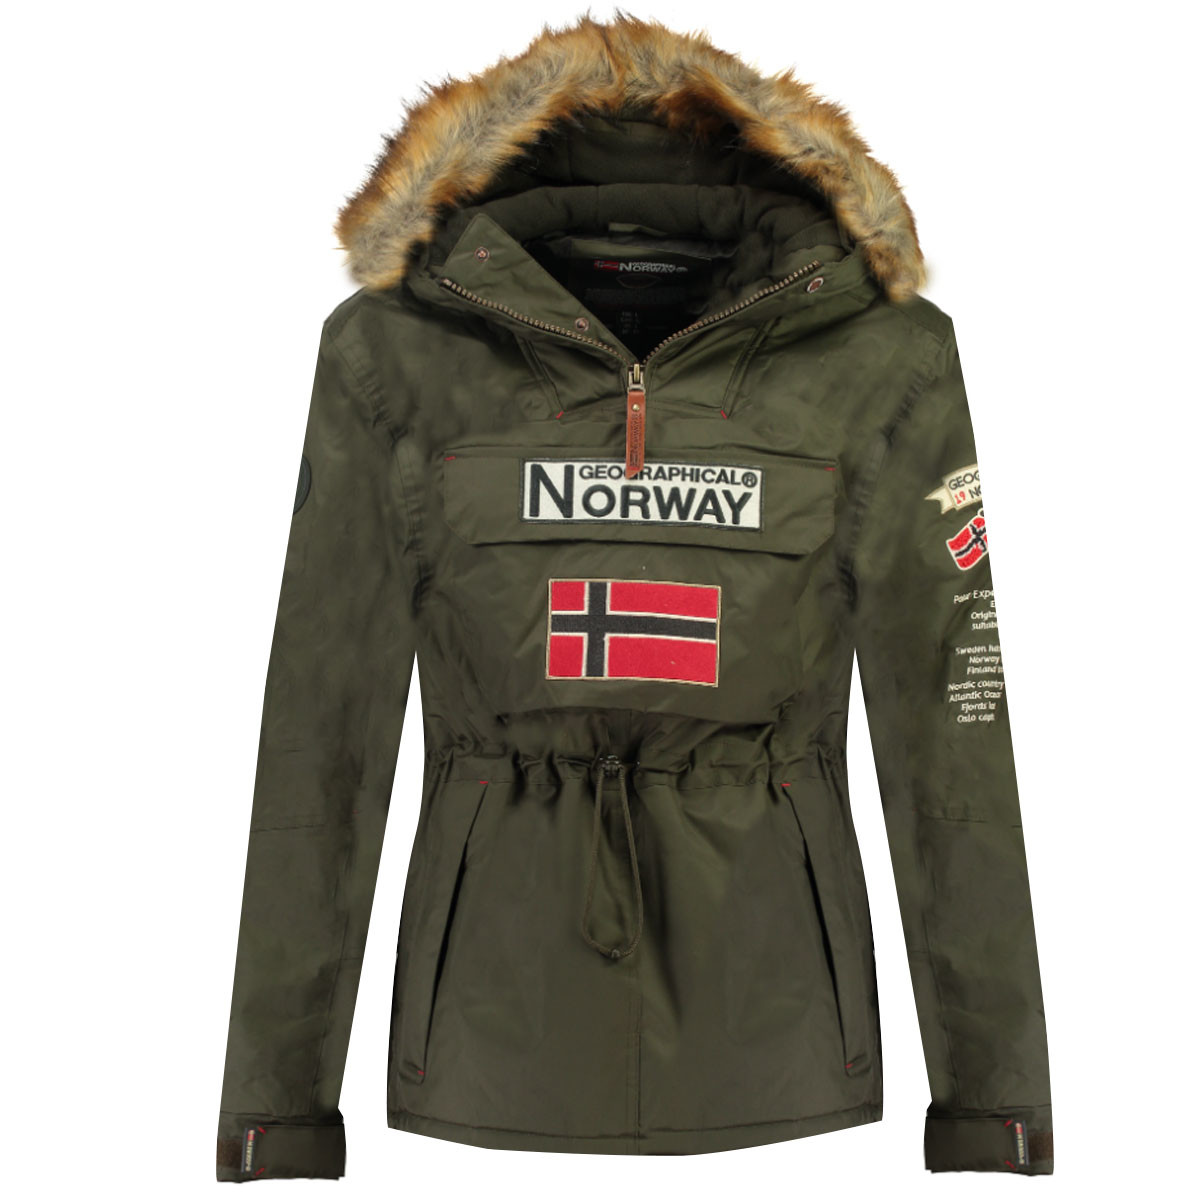 Geographical Norway  Παρκά Geographical Norway BARMAN BOY